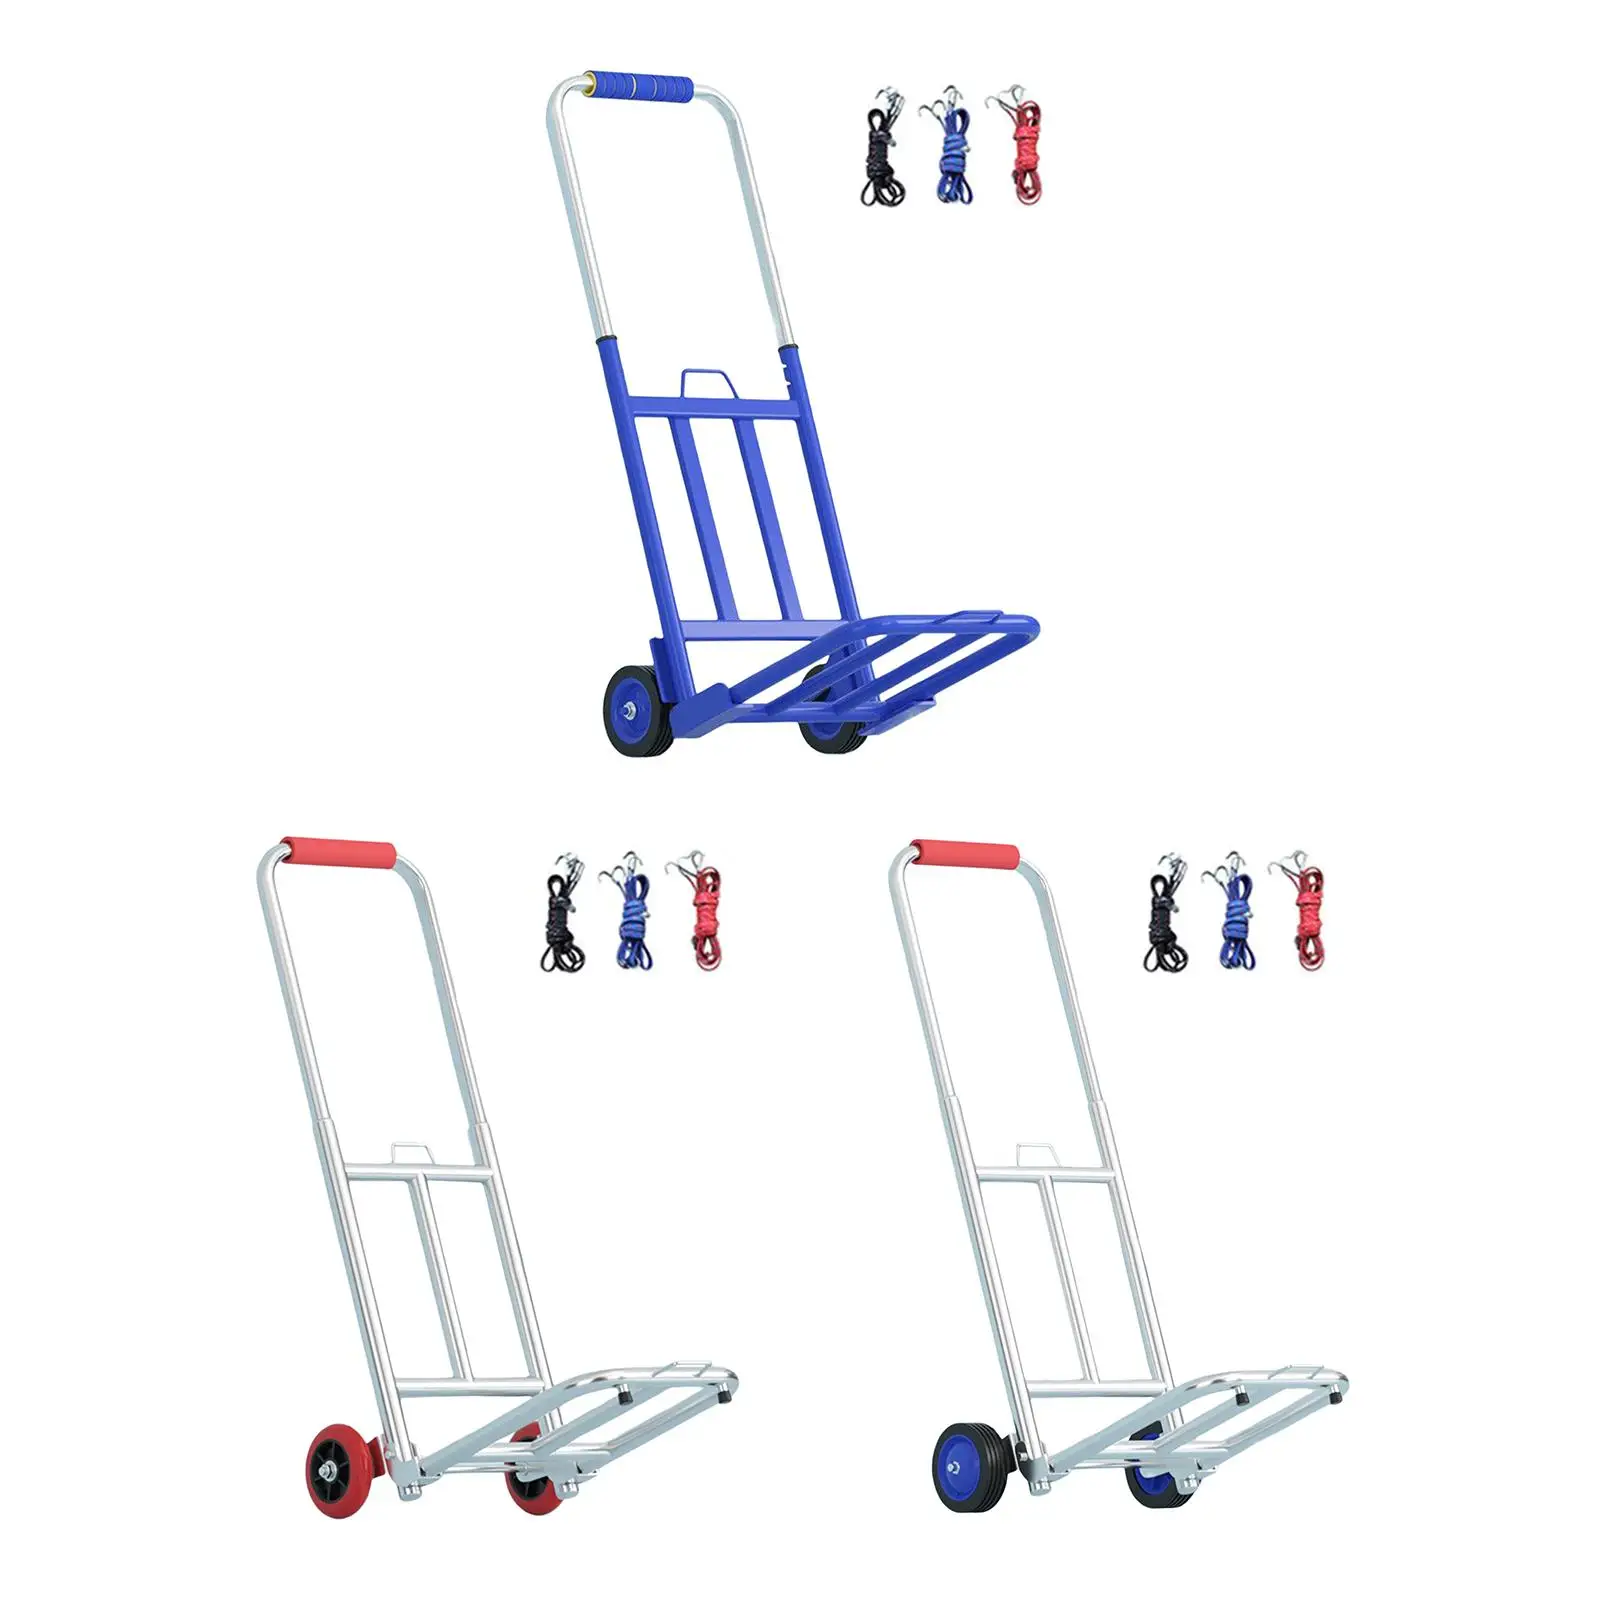 Foldable Hand Cart Adjustable 2 Wheel Compact with Rope Foldable Roller Shopping Trolley for Moving Shopping Transportation